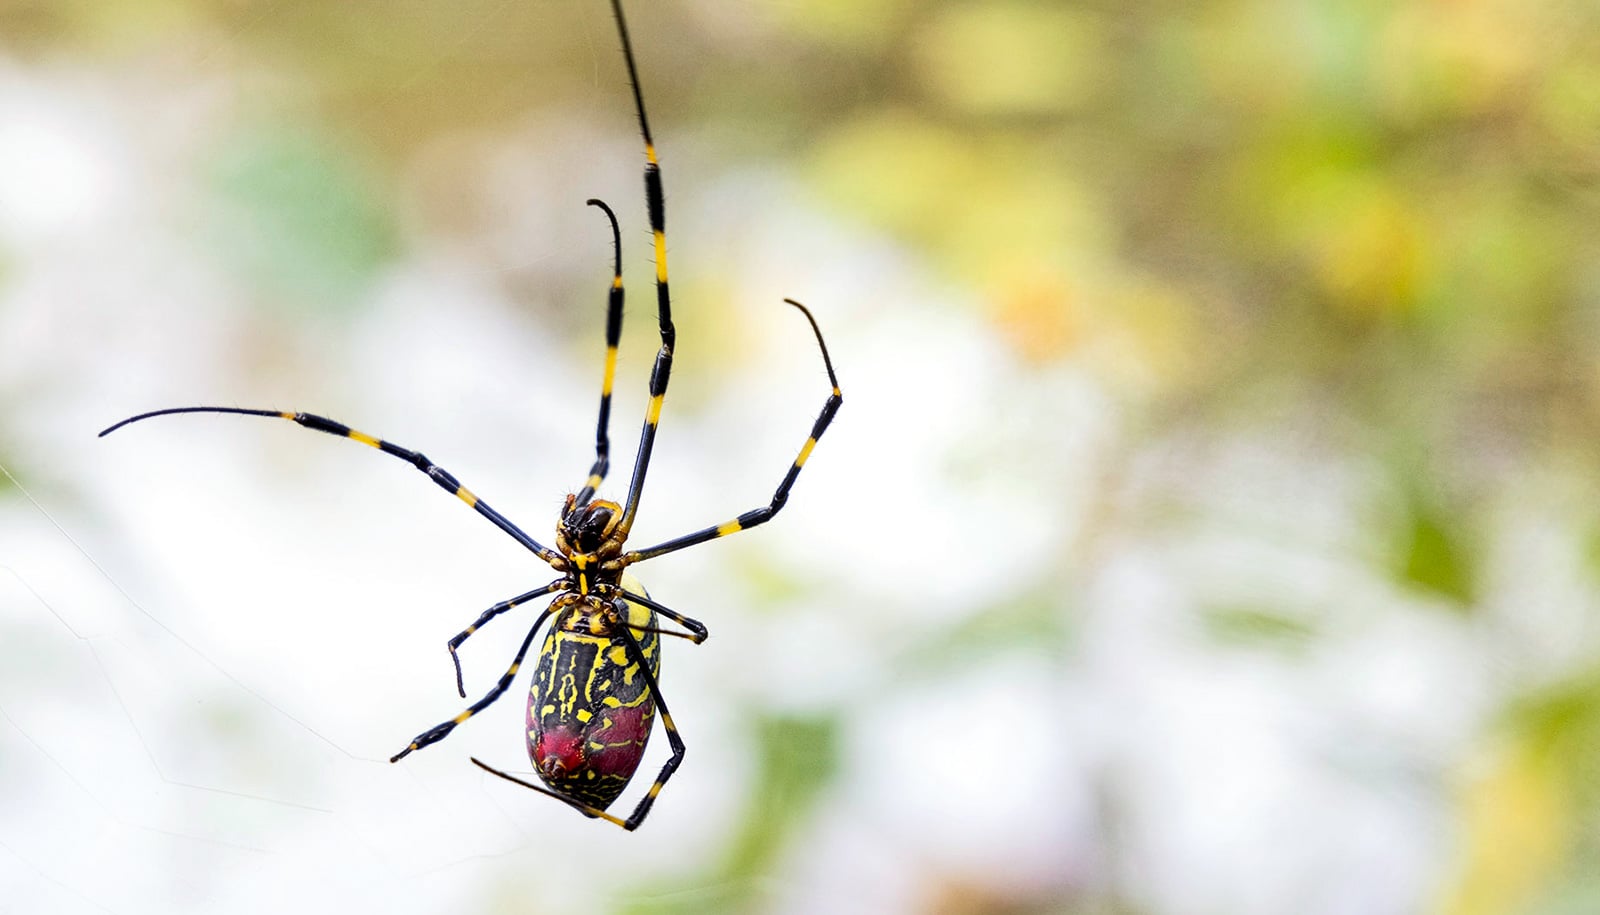 A Joro spider hangs in the air with yellow and black legs and red, yellow, and black body.